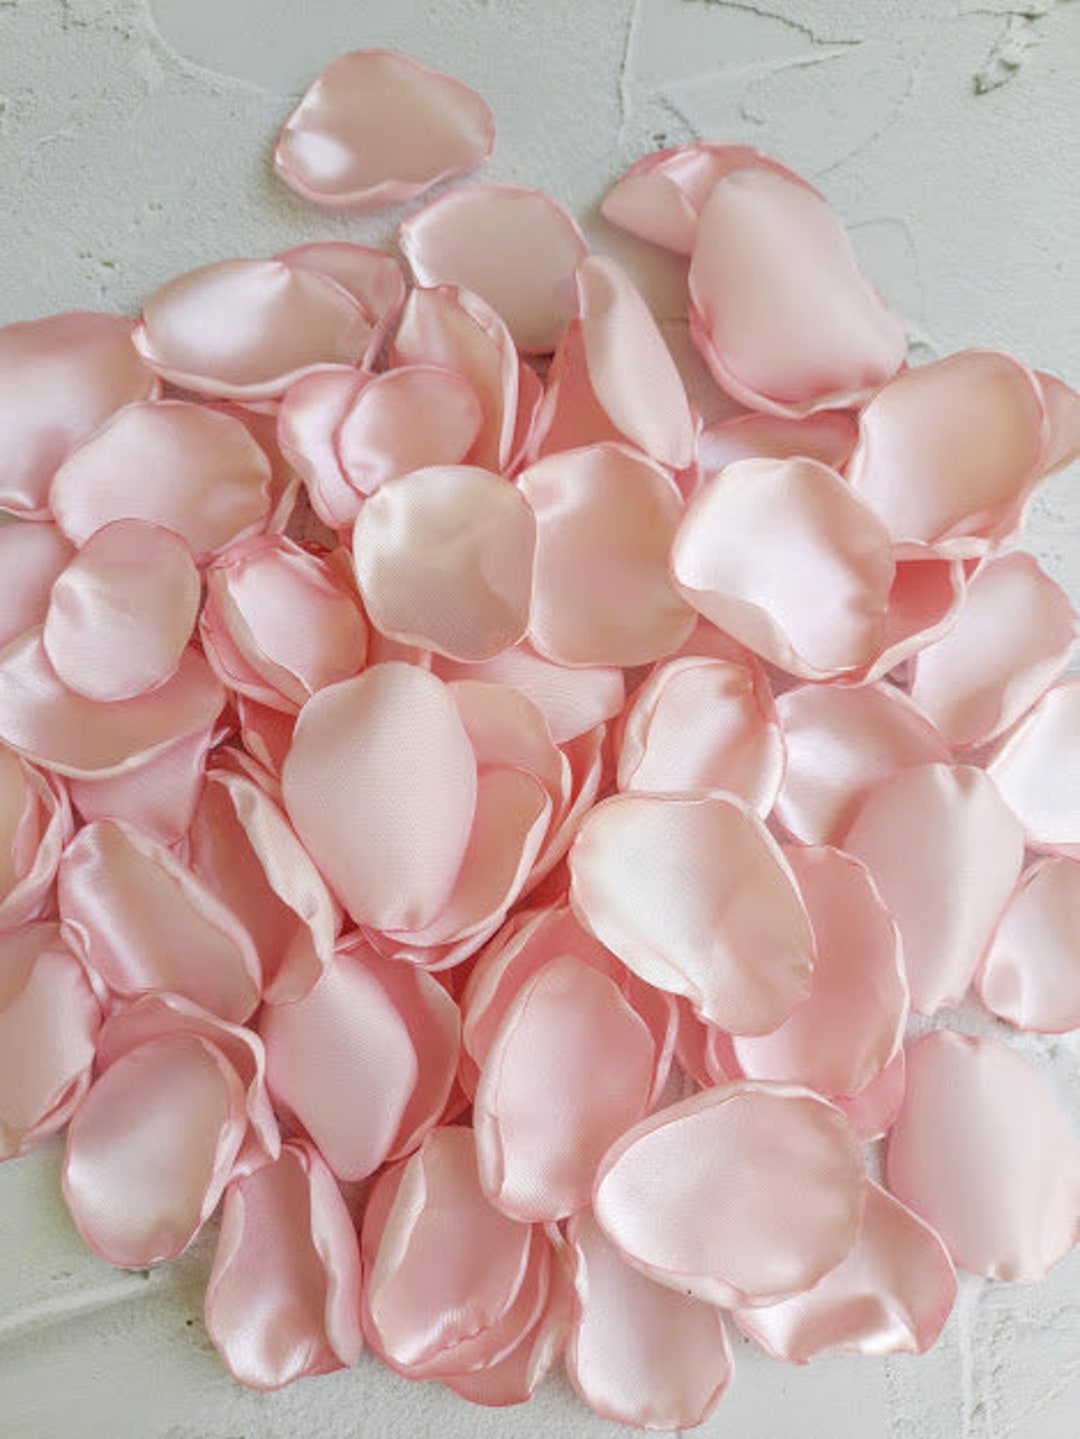  3000 Pcs Rose Petals Artificial Flowers Silk Petals for  Valentine's Day Wedding Decor Rose Petals for Romantic Night Bridal Party  Decorations (Ivory) : Home & Kitchen